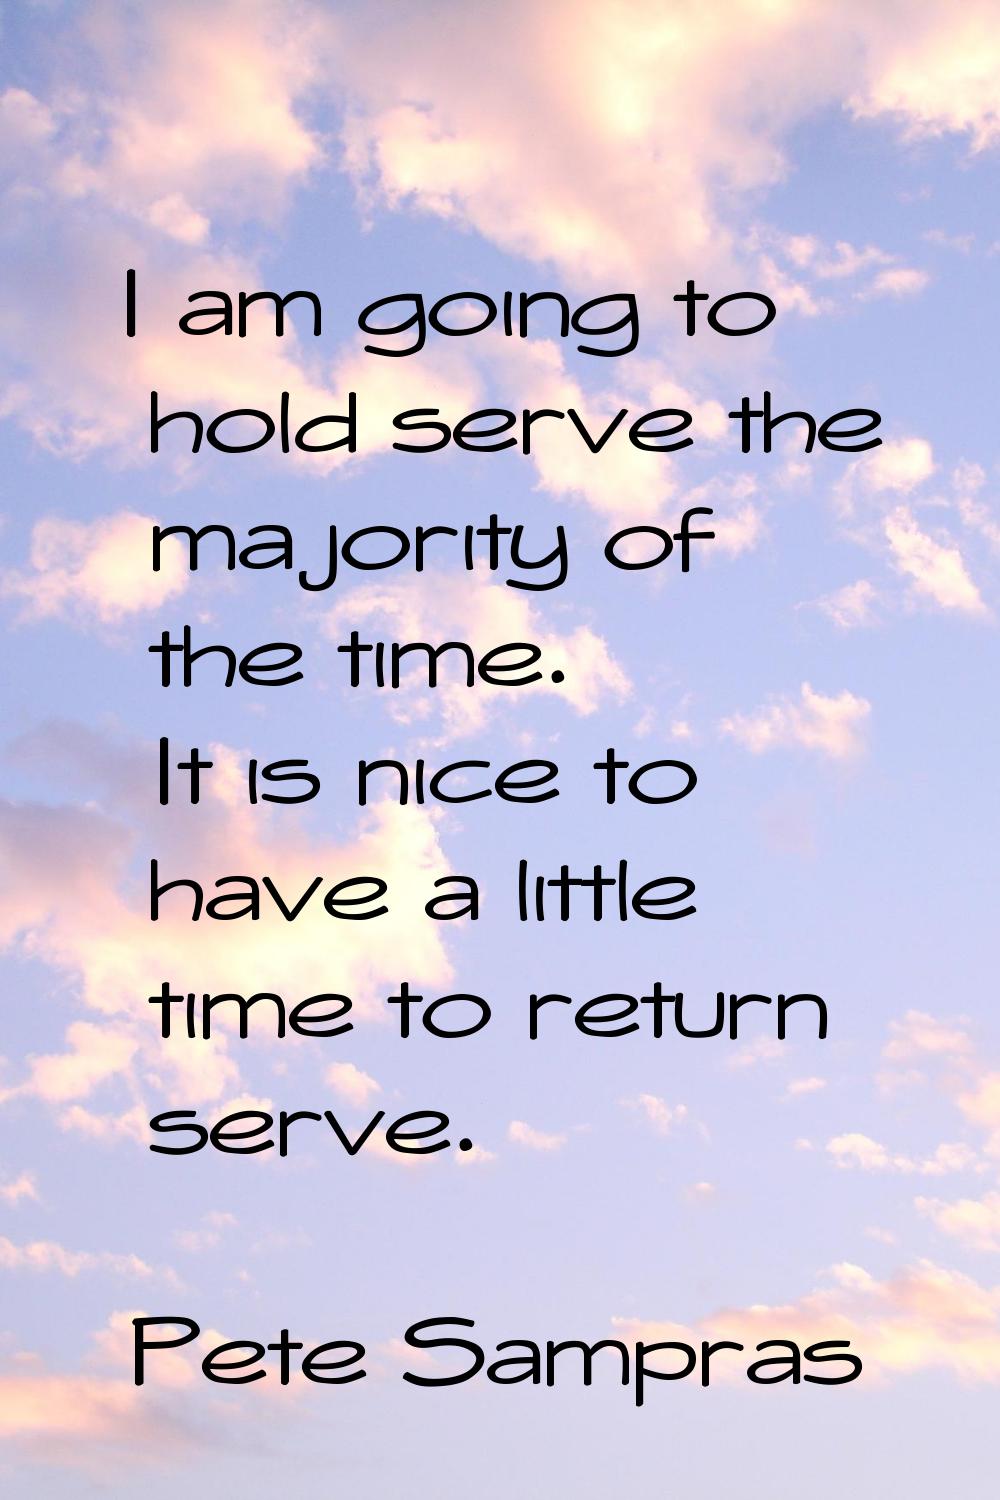 I am going to hold serve the majority of the time. It is nice to have a little time to return serve